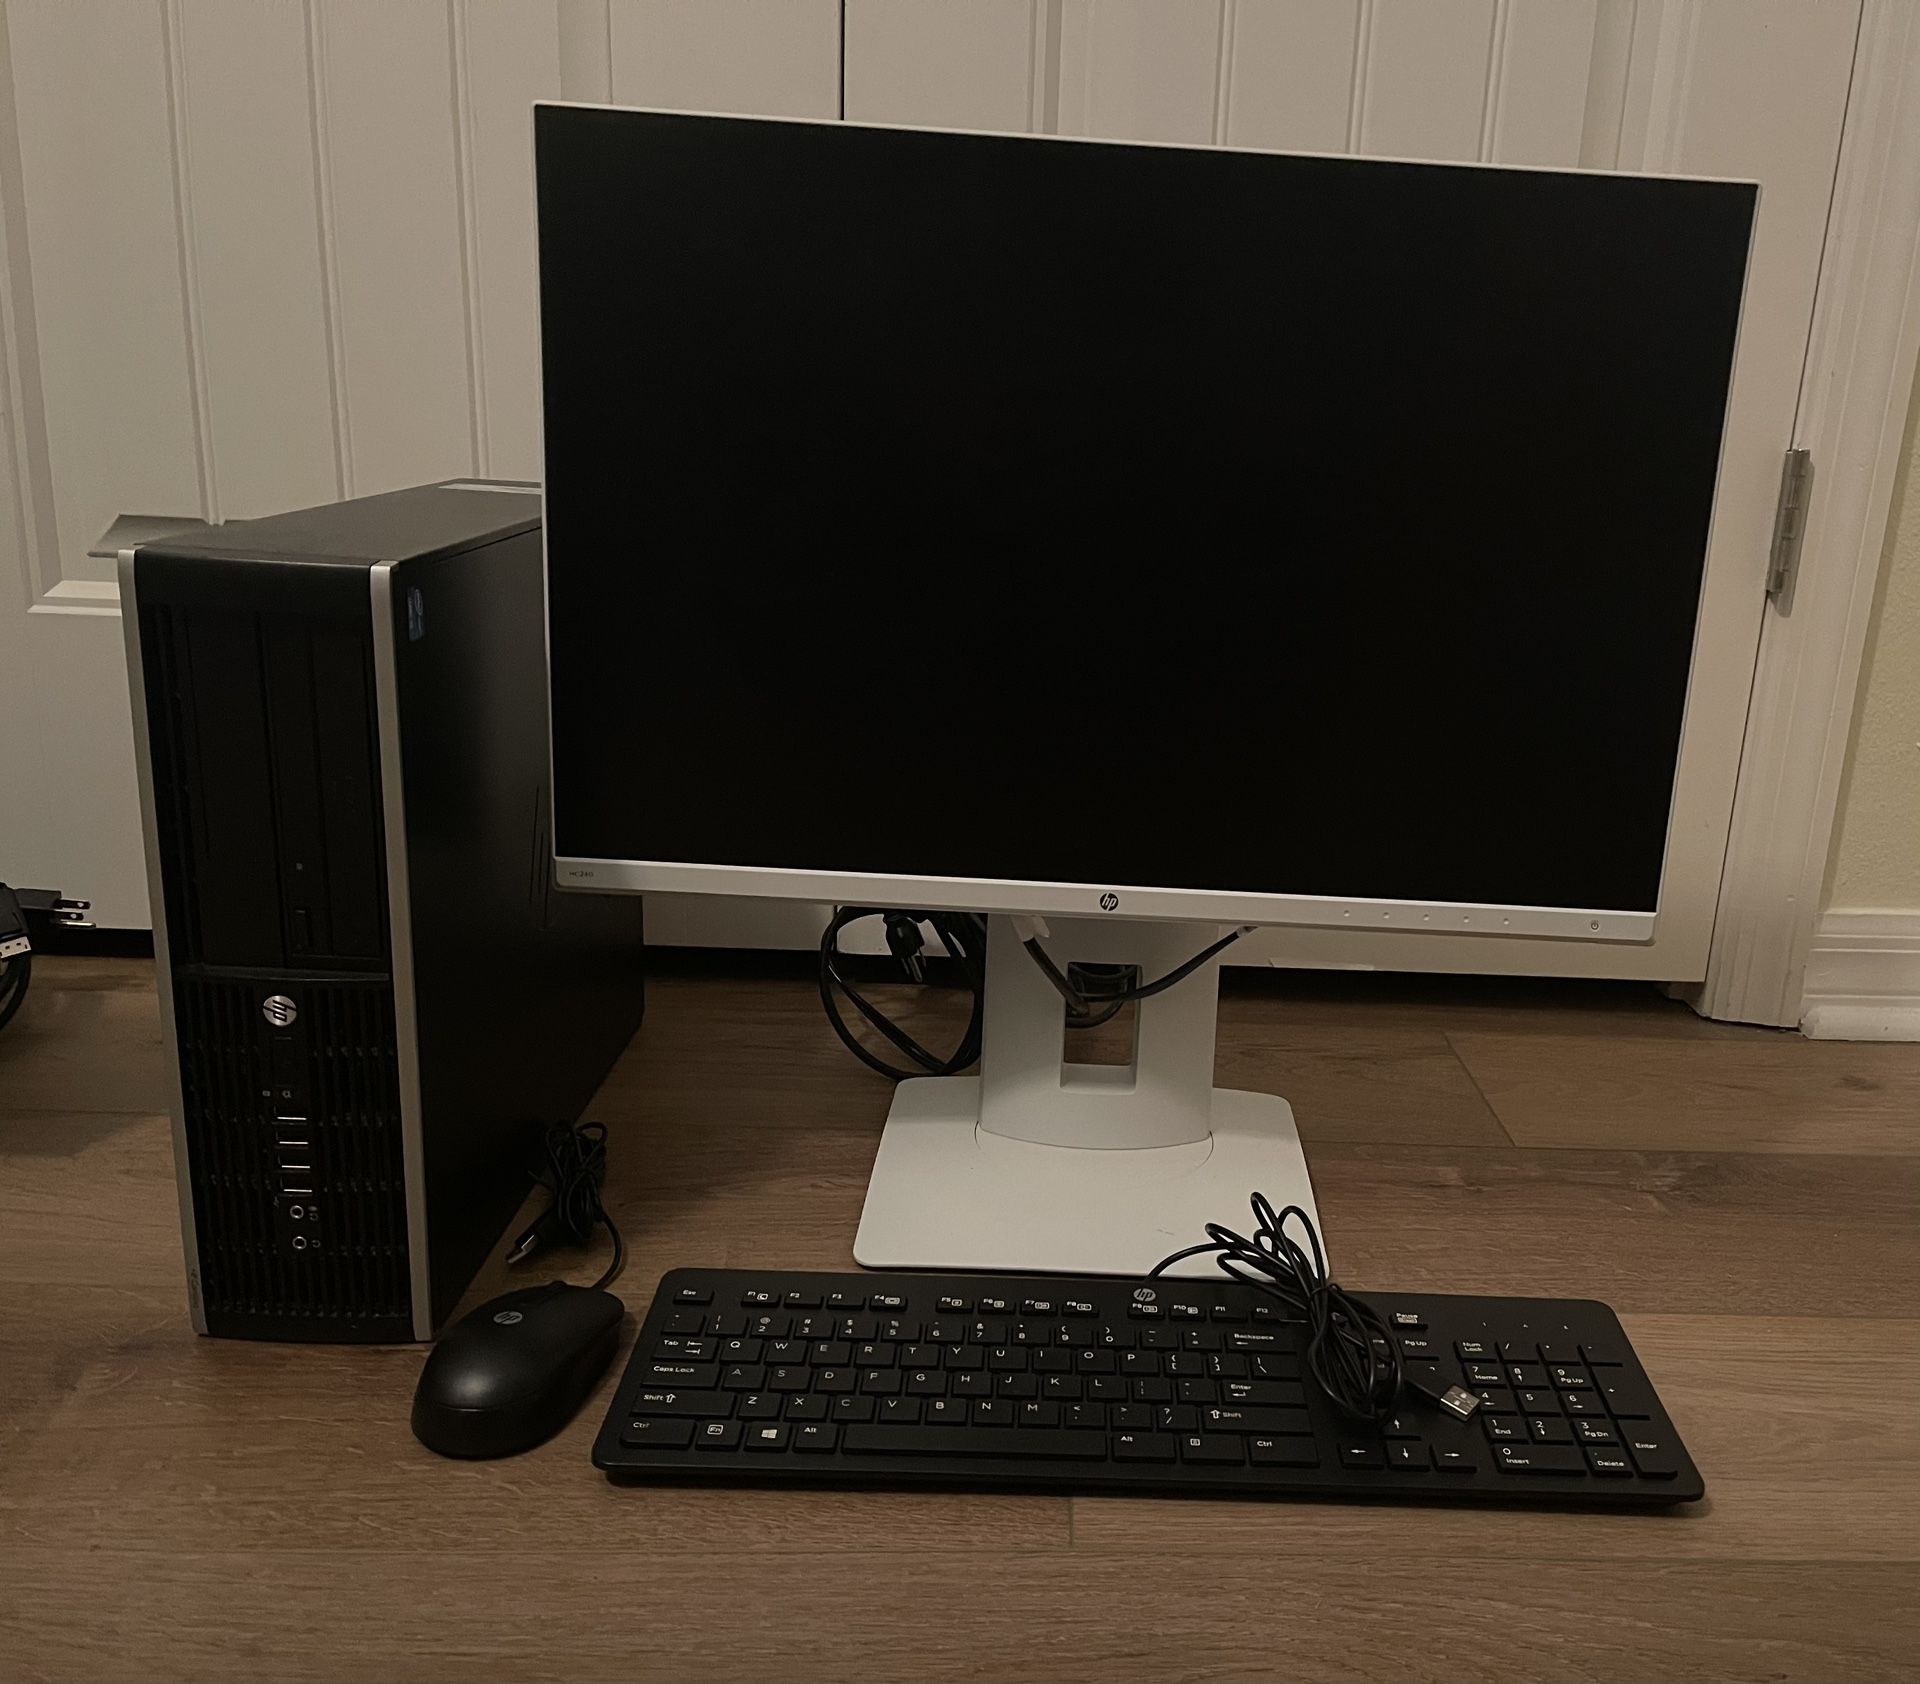 HP Home Computer For Sale With Flat Screen Monitor